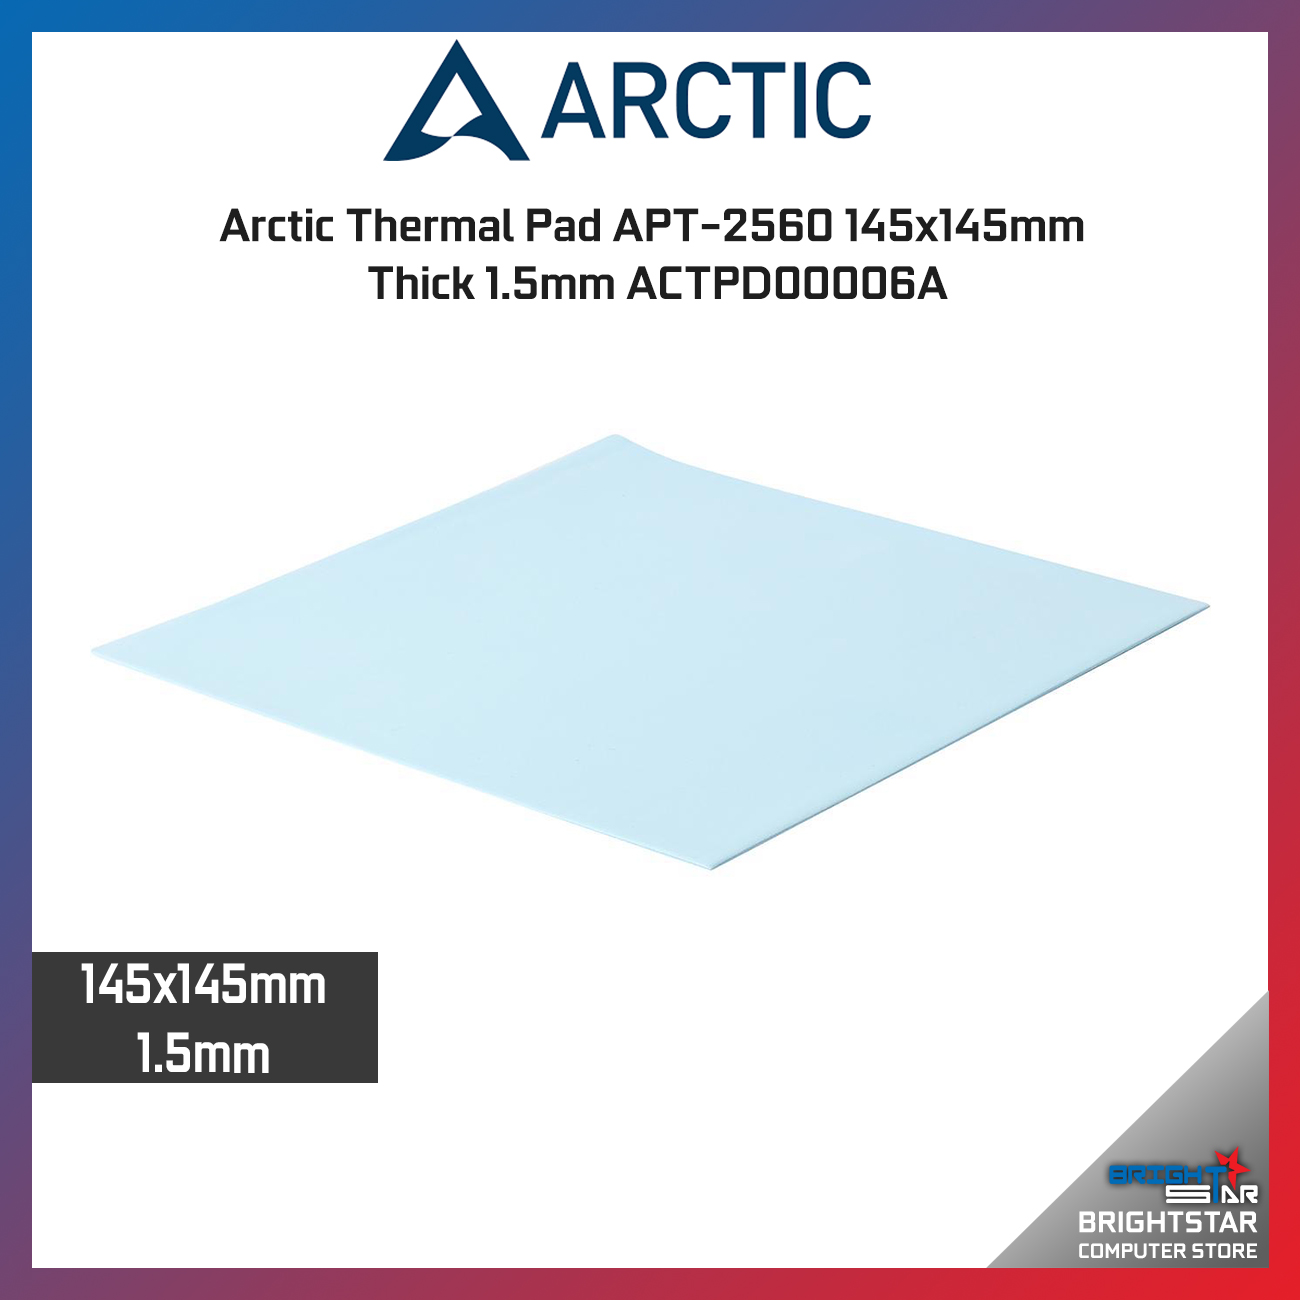 Arctic Thermal Pad APT-2560 145x145mm Thick 1.5mm ACTPD00006A